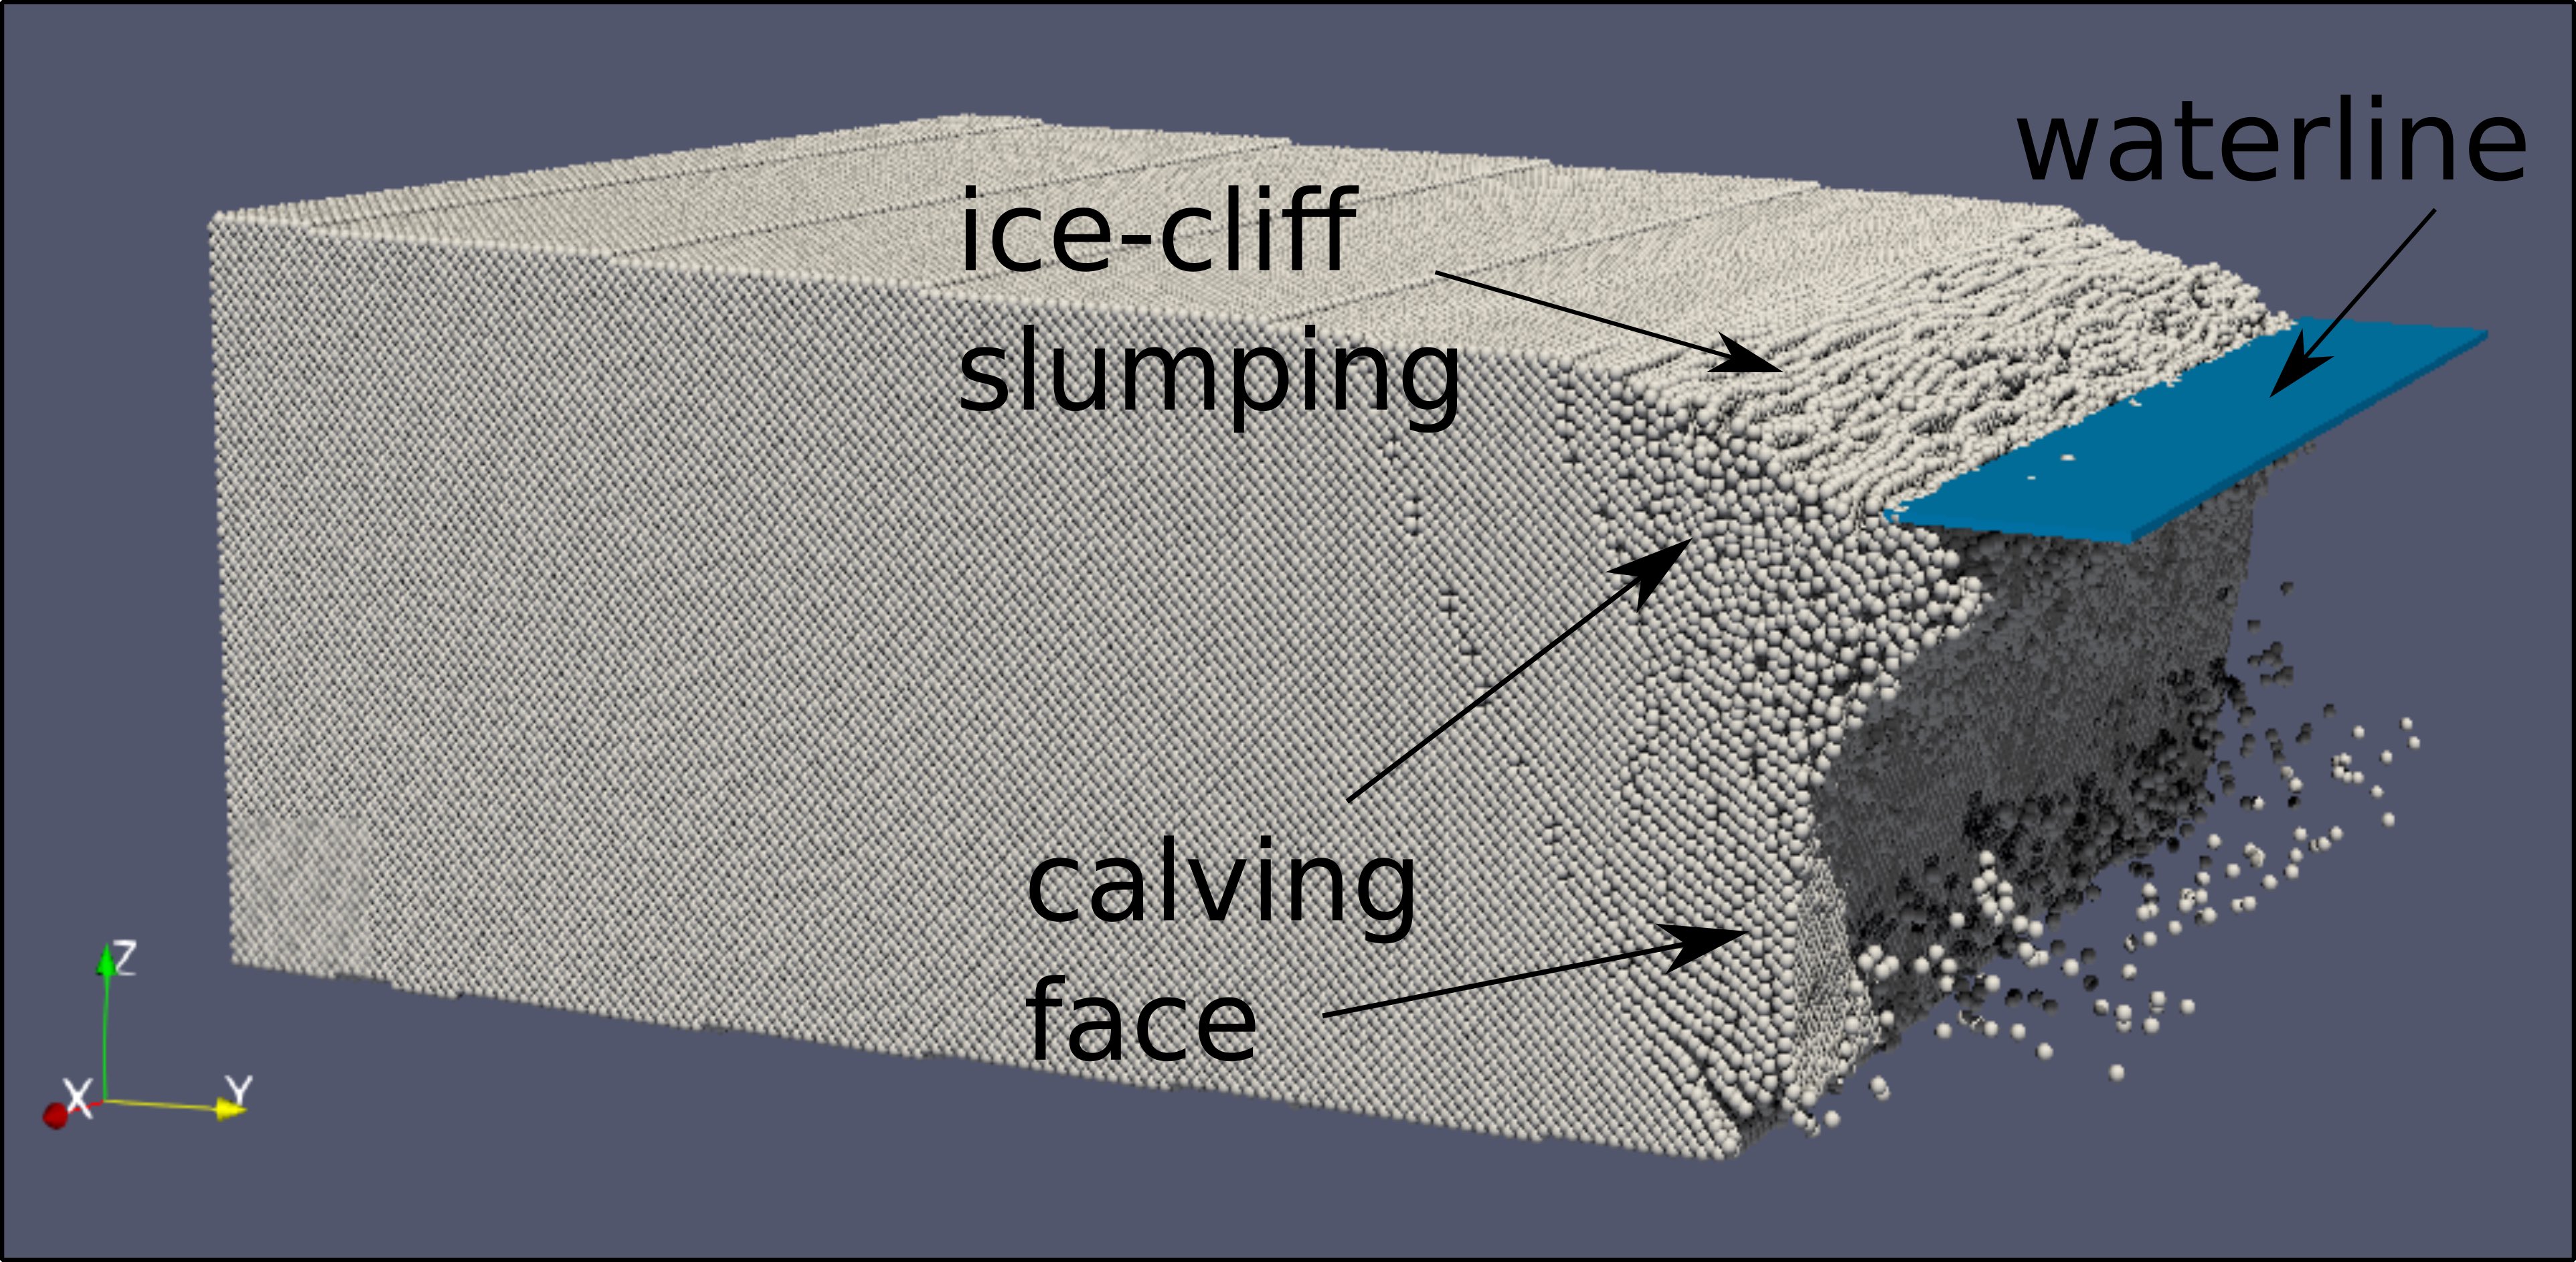 Using the Helsinki Discrete Element Model (HiDEM), we simulate the collapse of a tall ice-cliff as the strains inside the glacier become too large for the ice to sustain. The calving face is the entire section of ice that is exposed to the ocean or air. The ice cliff is the portion of the calving face above the waterline. Figure modified from Crawford et al. (in press).